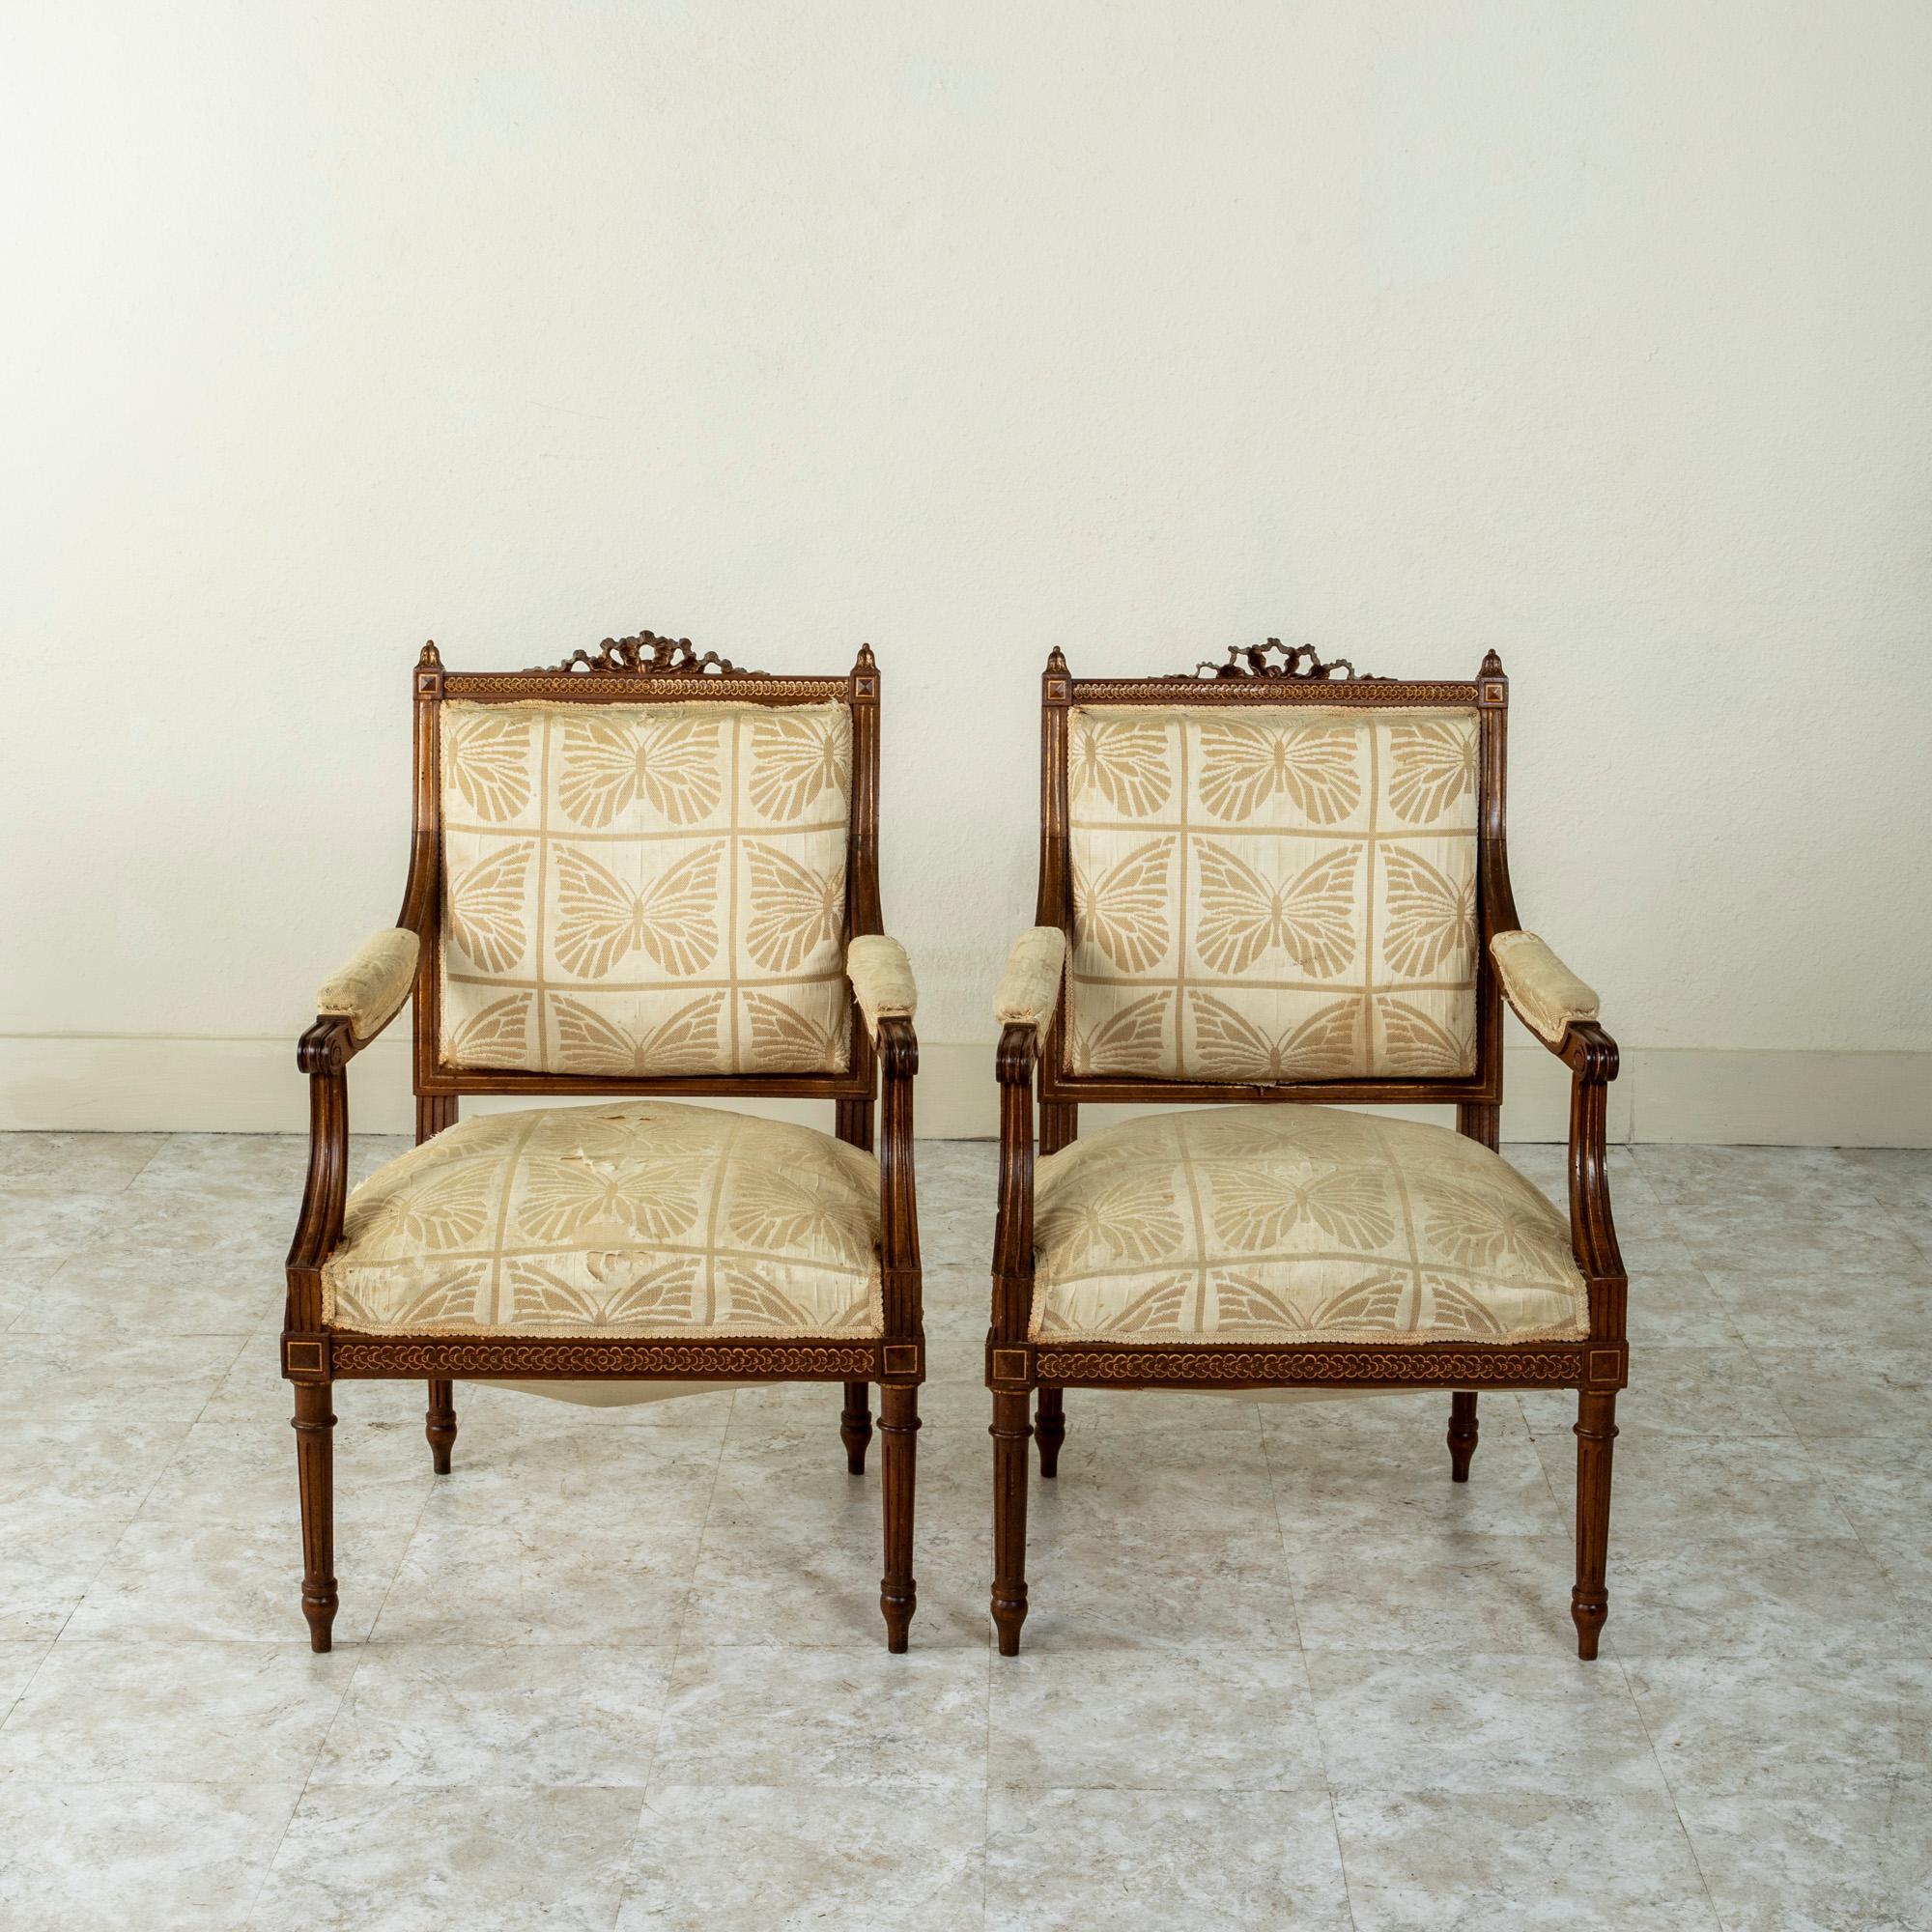 This pair of late nineteenth century Louis XVI style hand carved walnut armchairs features a central knotted ribbon at the top of the seat back and acanthus leaf finials. The chairs are also ornamented with an overlapping quatrefoil motif and gold